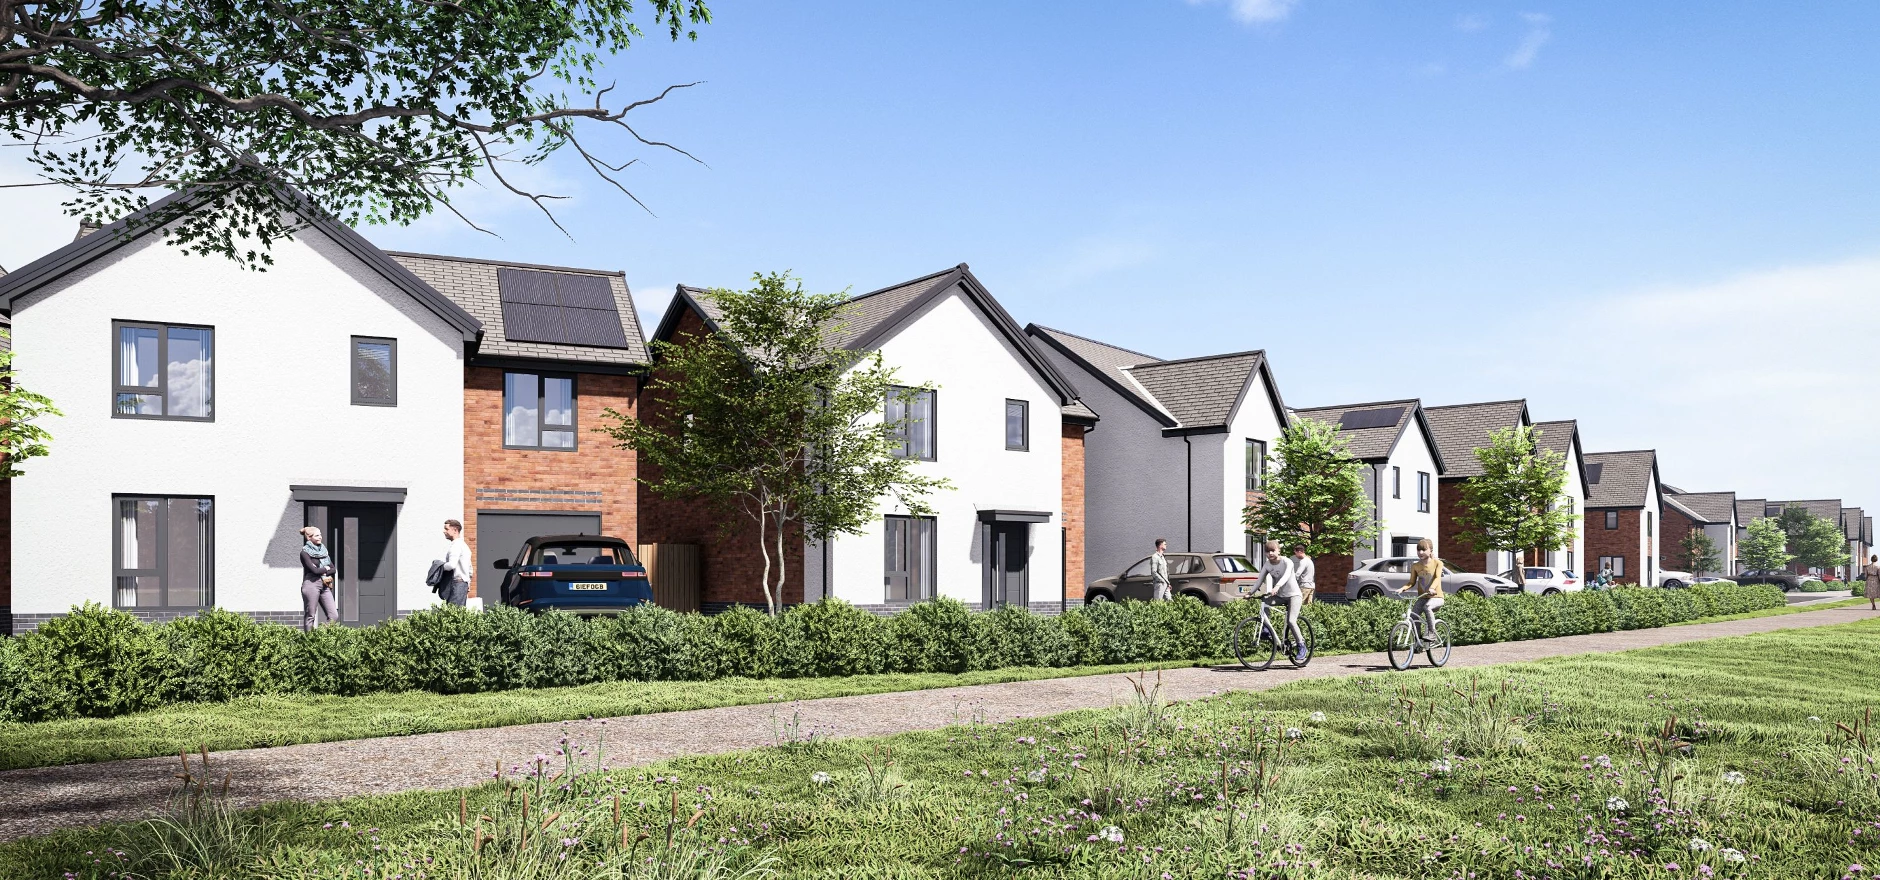 Plans submitted - Honey hopes to build 54 new homes at Waverley